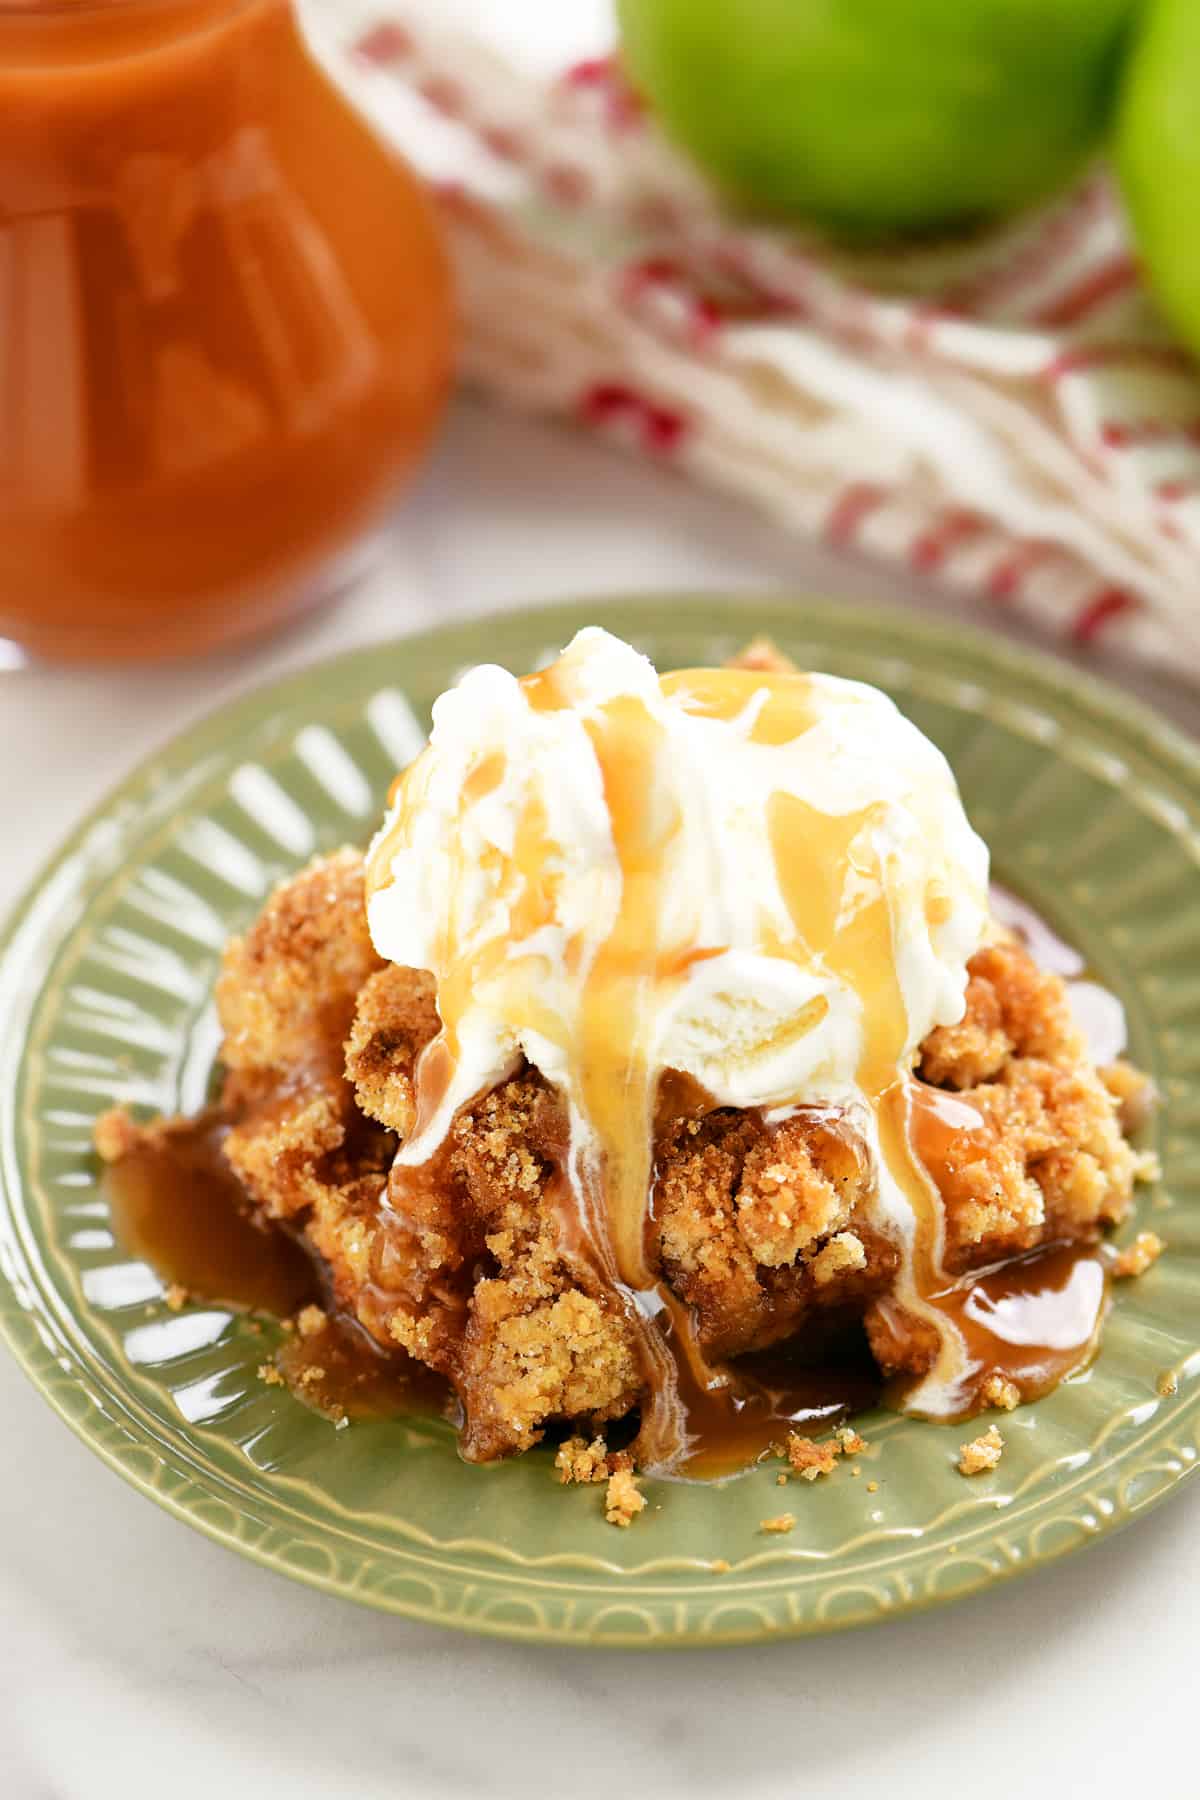 caramel drizzled over ice cream on top of apple crumble